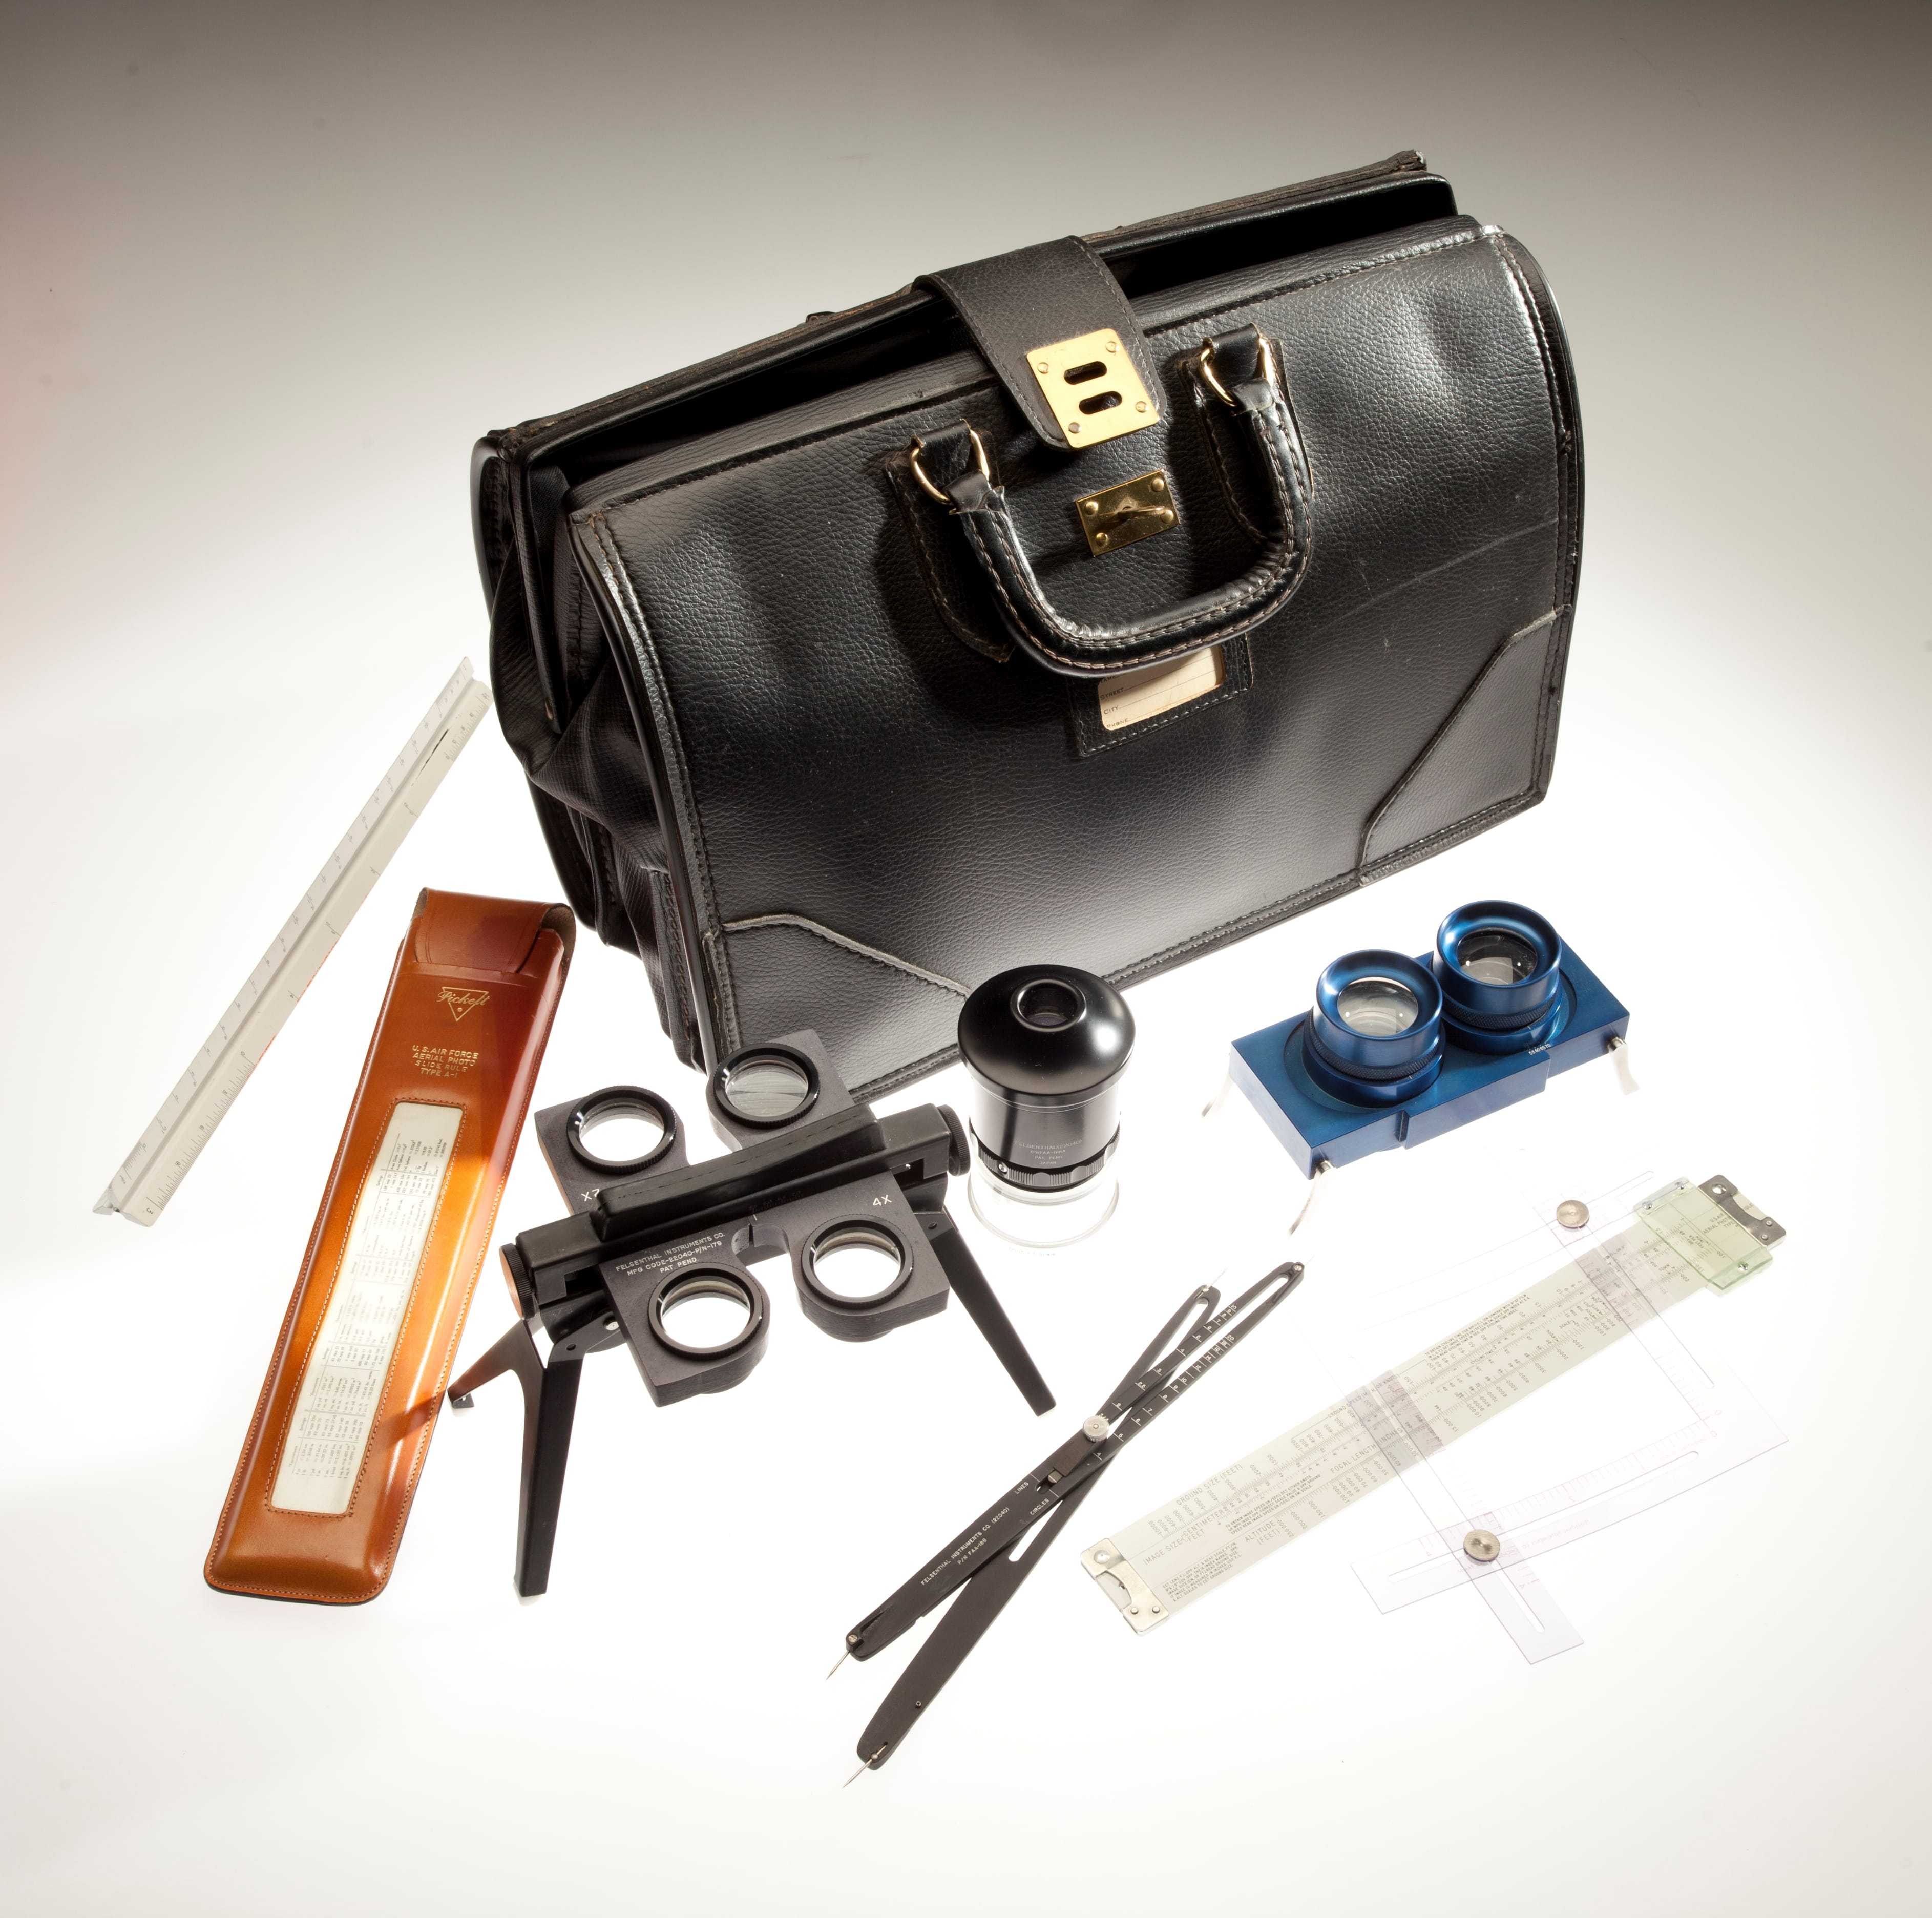 A black briefcase surrounded by magnifying and measuring tools and other items to analyze a photo.